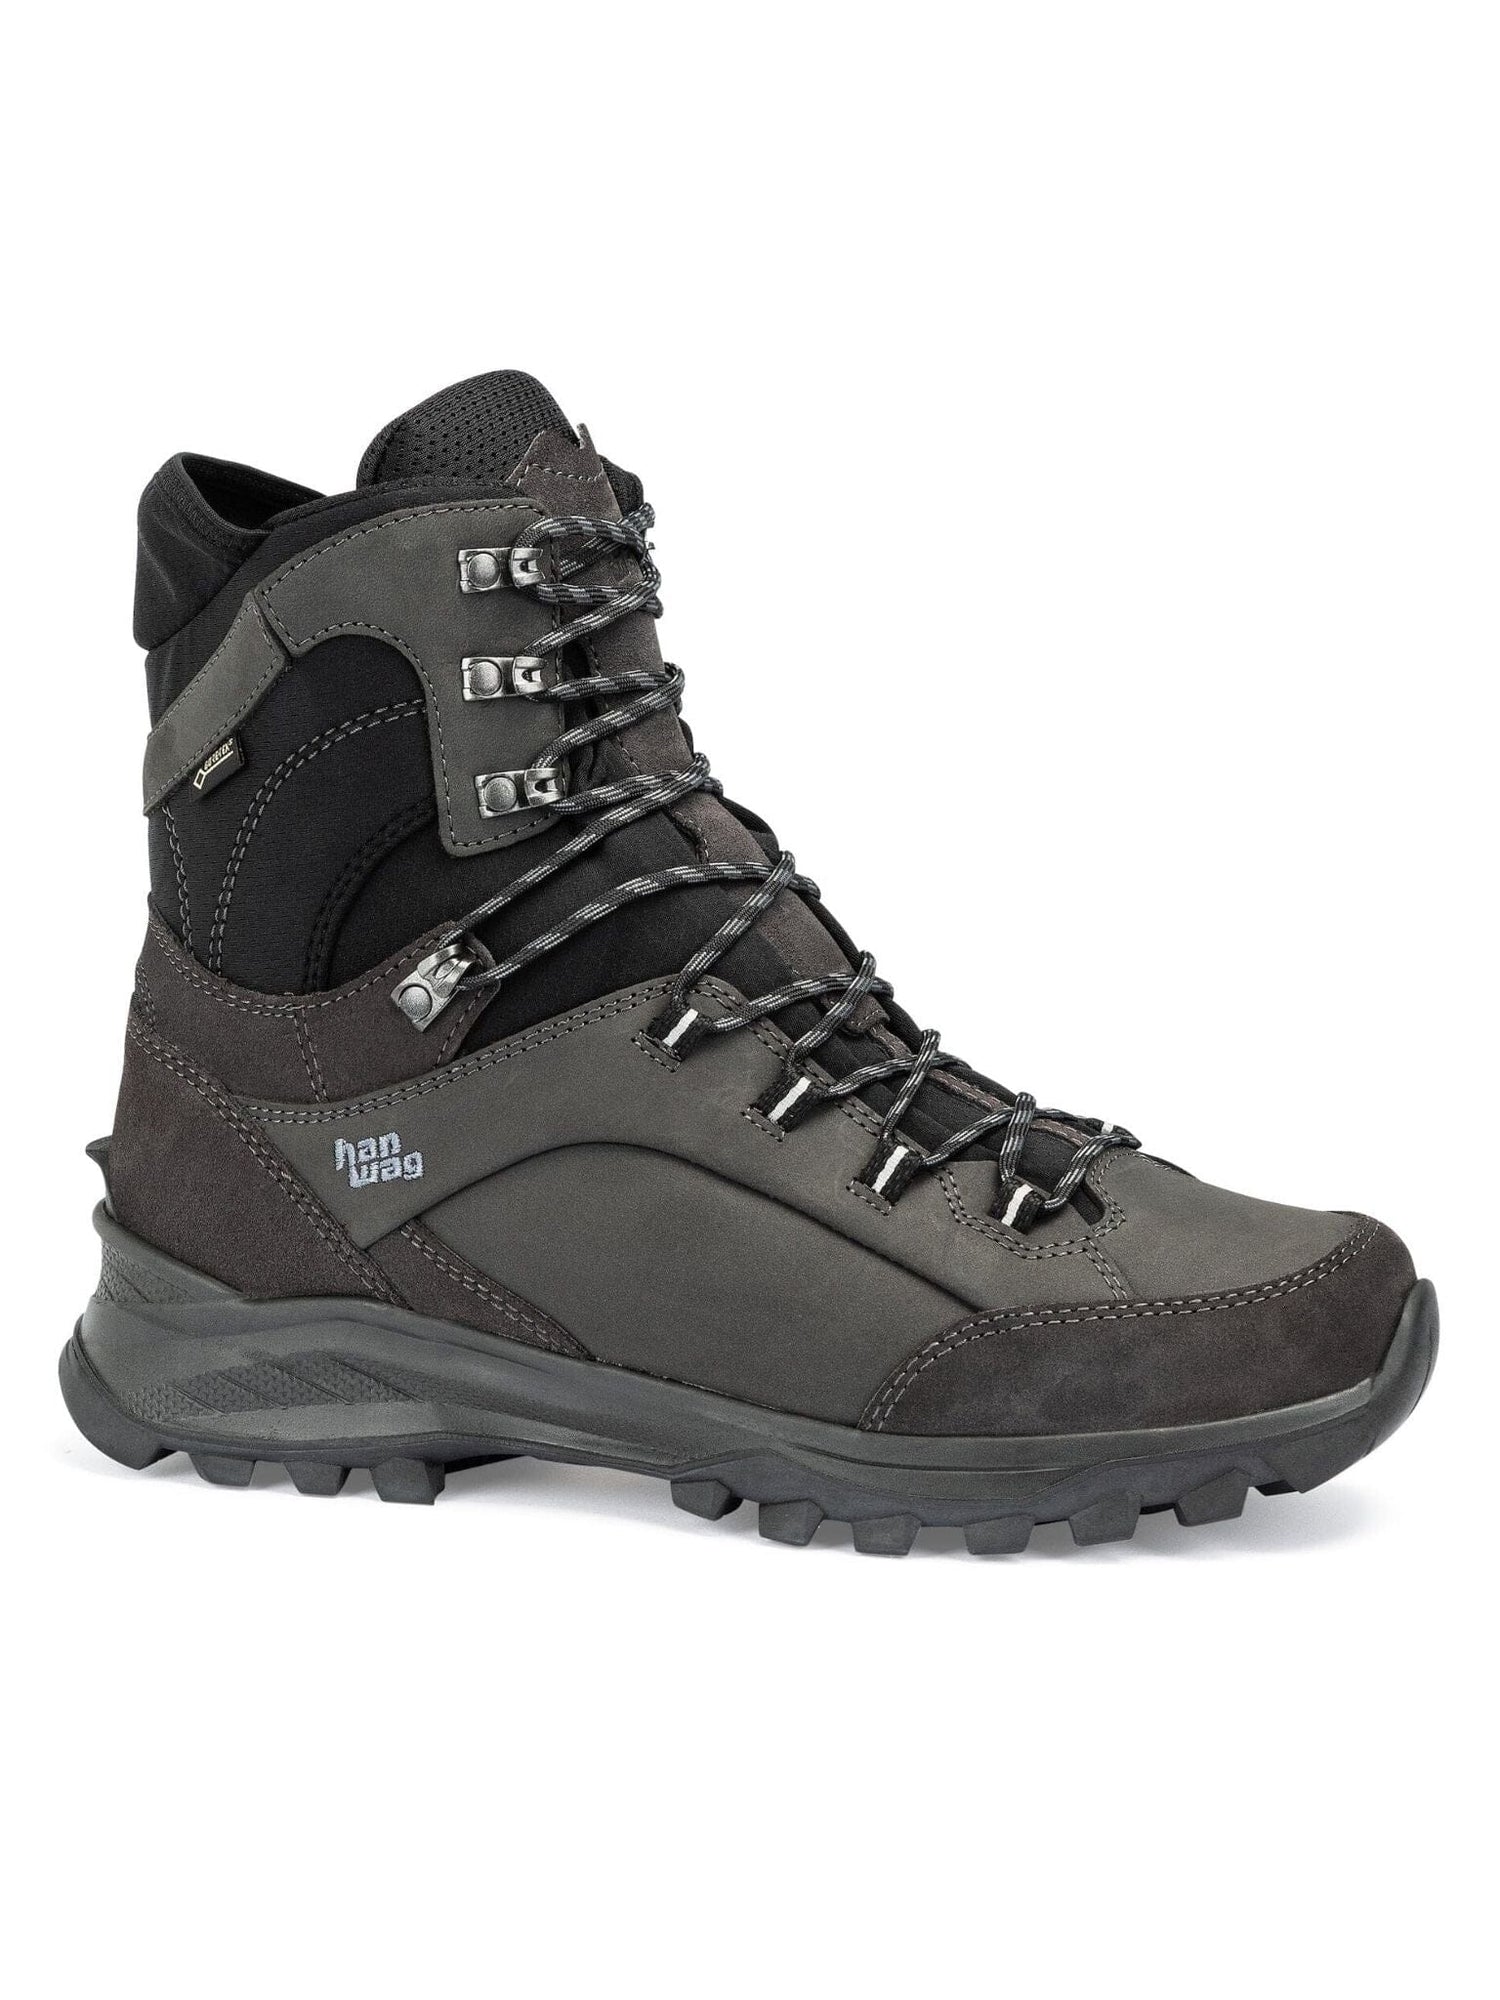 Hanwag M's Banks Snow GTX - Leather Working Group -certified nubuck leather Asphalt Black Shoes